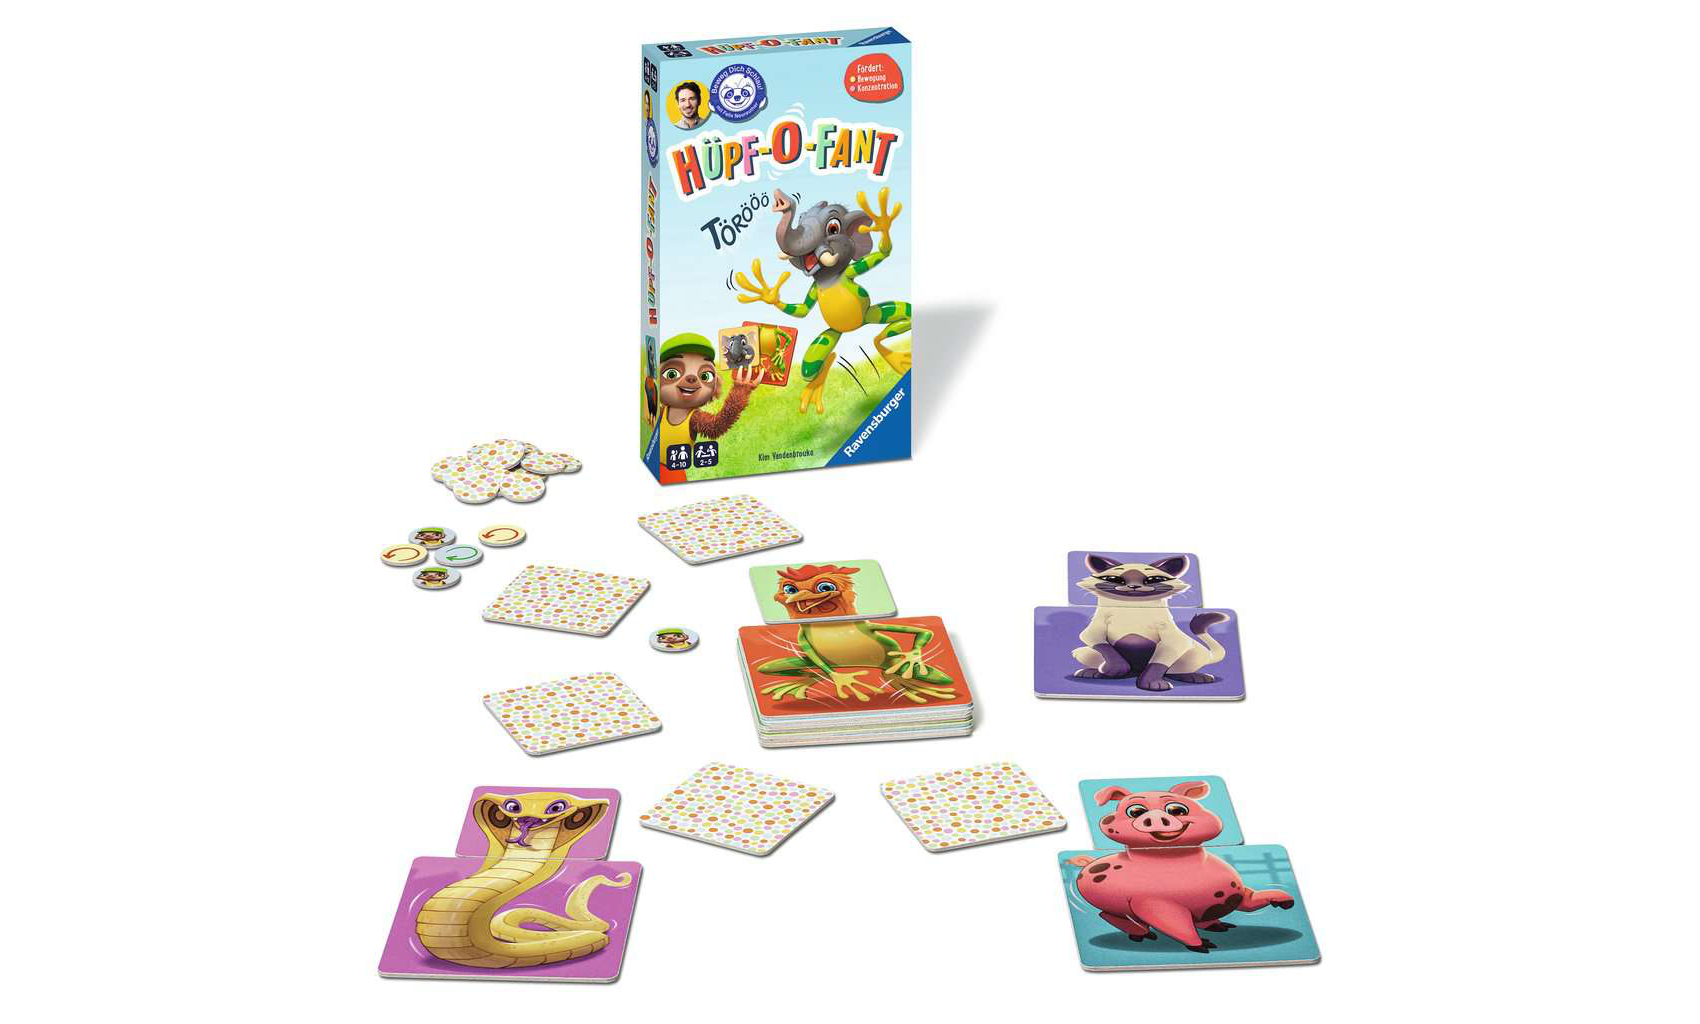 Hupo-o-fant game showing multiple animals with correctly paired heads and bodies, and the center pair is mismatched so the head is different from the body.